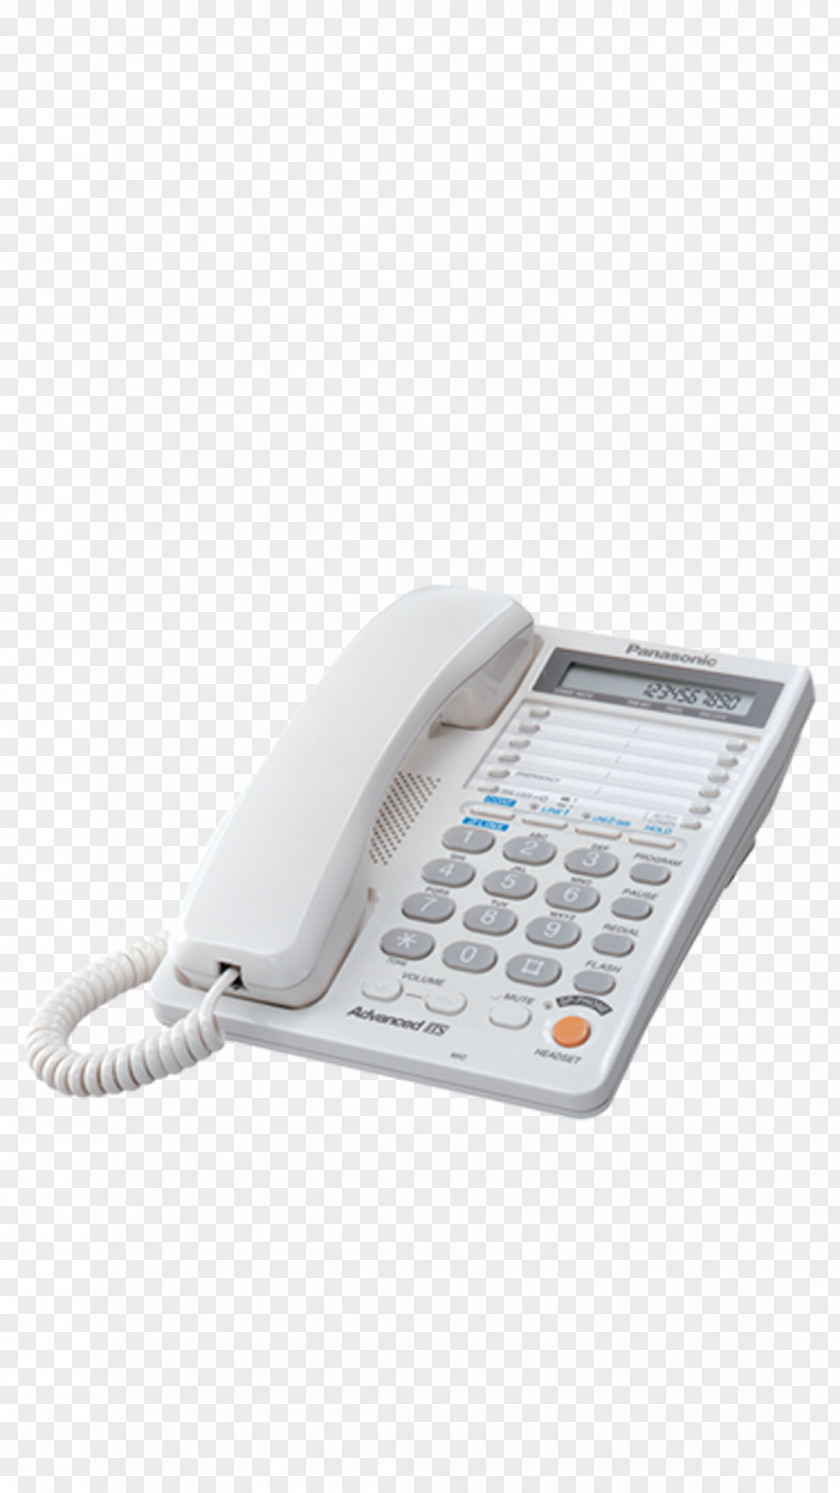 Panasonic Business Telephone System Home & Phones VoIP Phone PNG